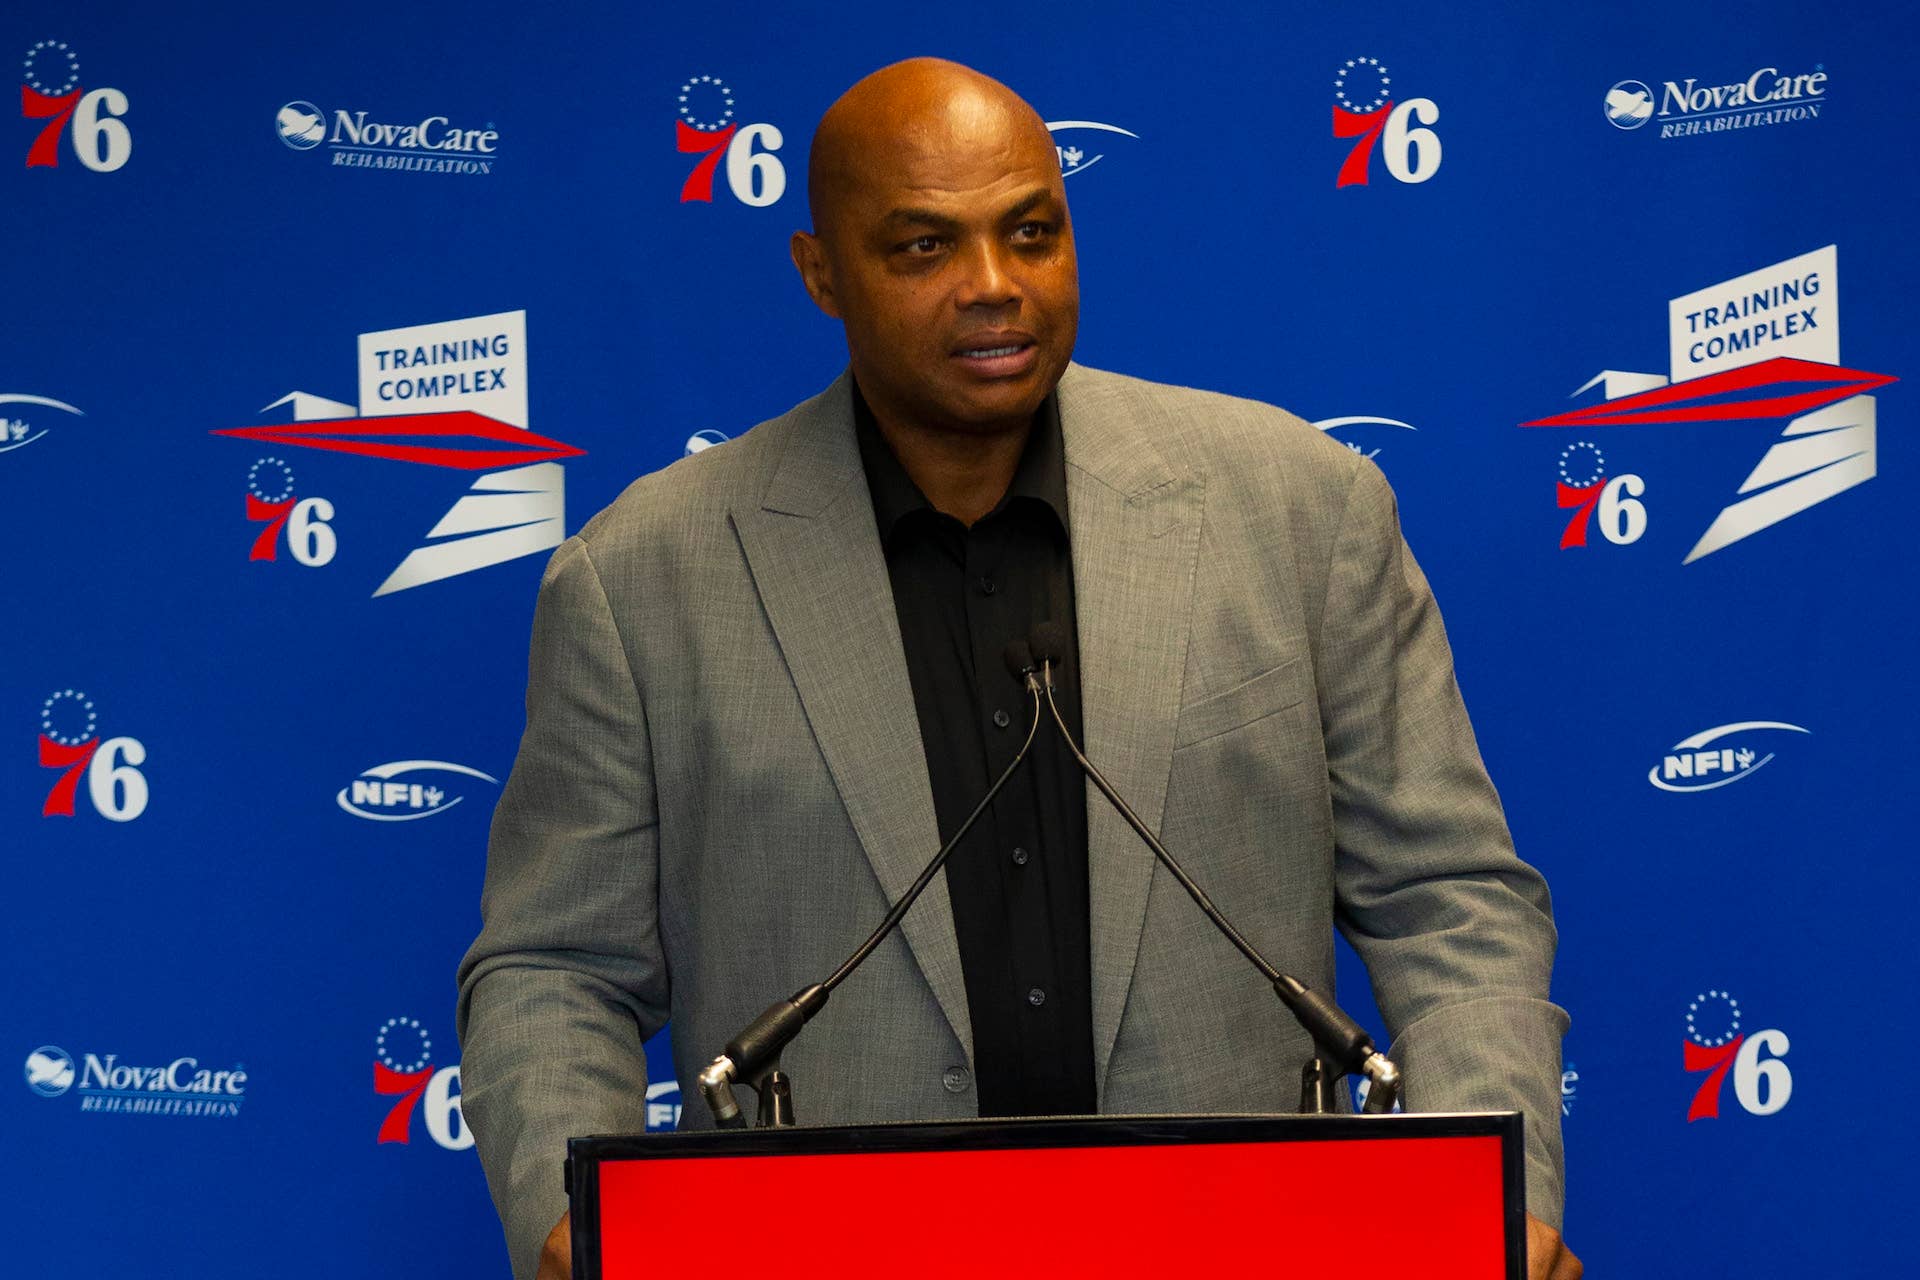 Charles Barkley speaks prior to his sculpture being unveiled at 76ers training facility.